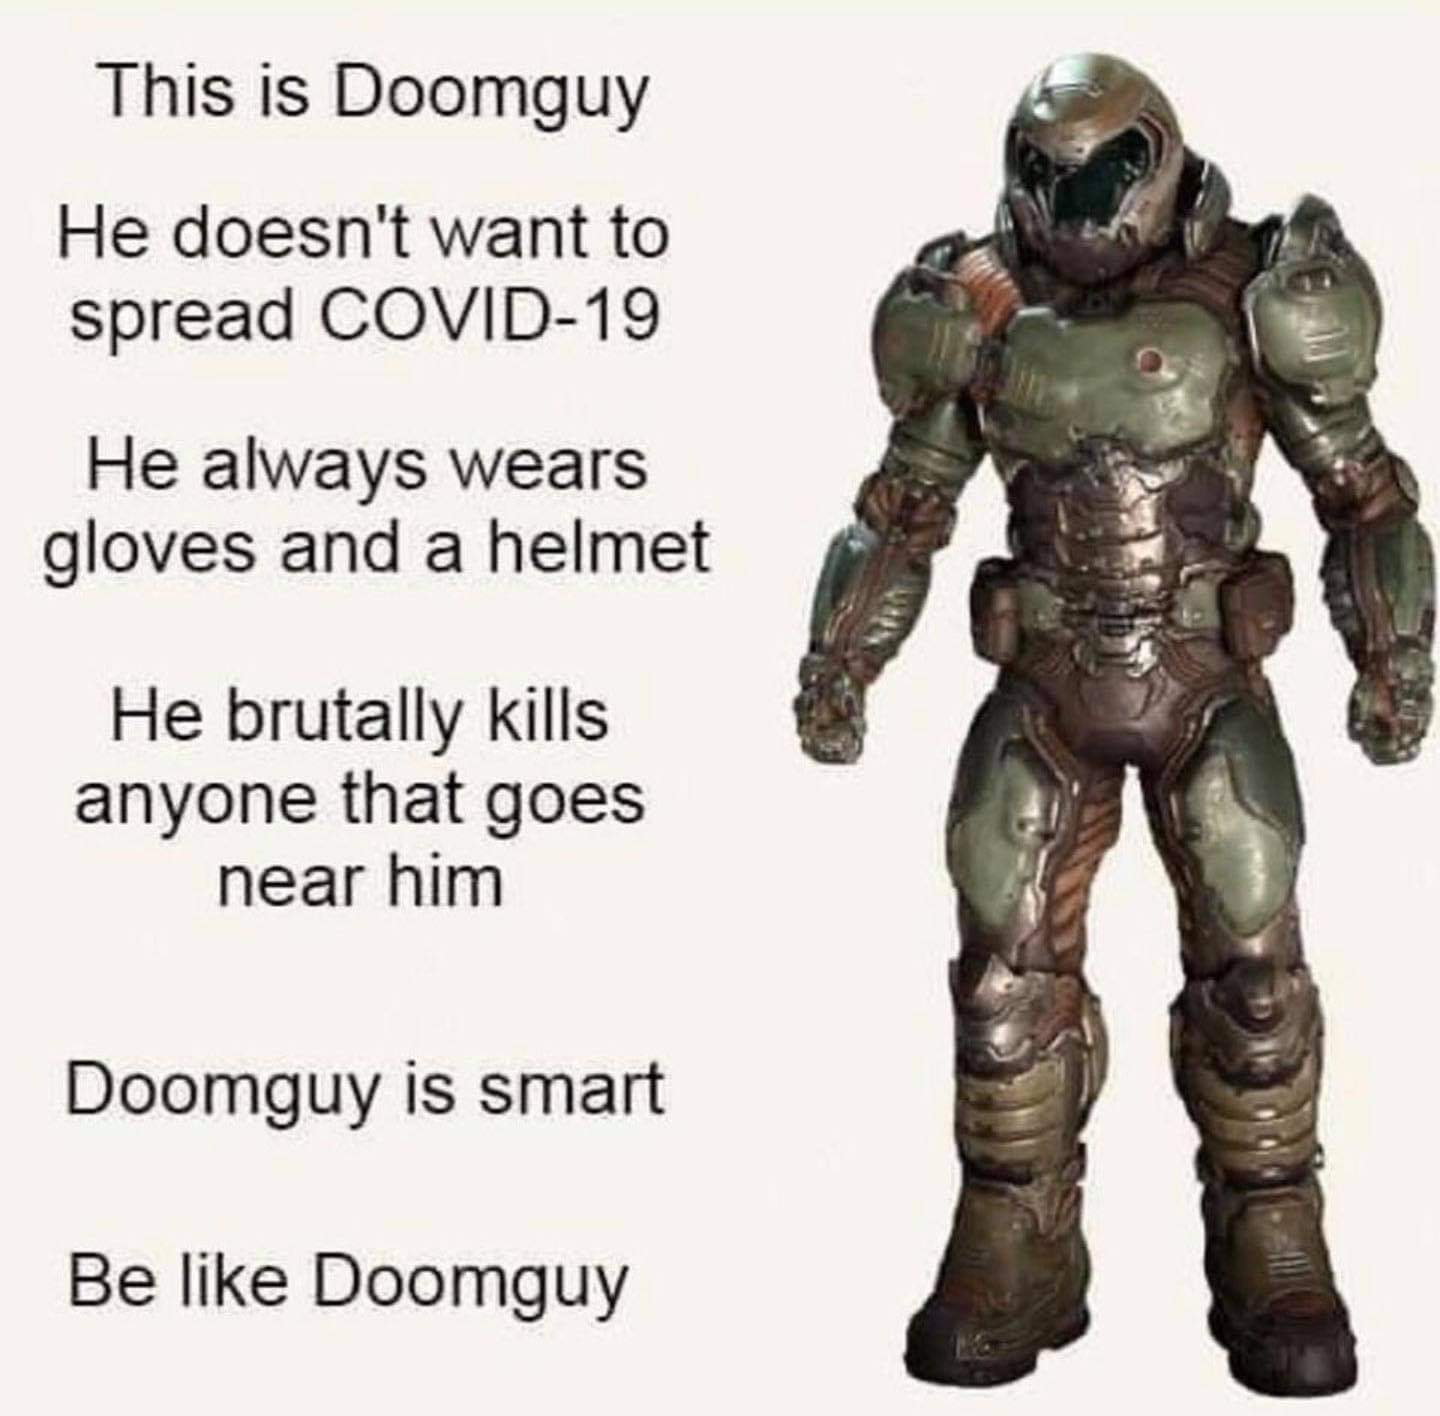 doom slayer action figure - This is Doomguy He doesn't want to spread Covid19 He always wears gloves and a helmet He brutally kills anyone that goes near him Doomguy is smart Be Doomguy